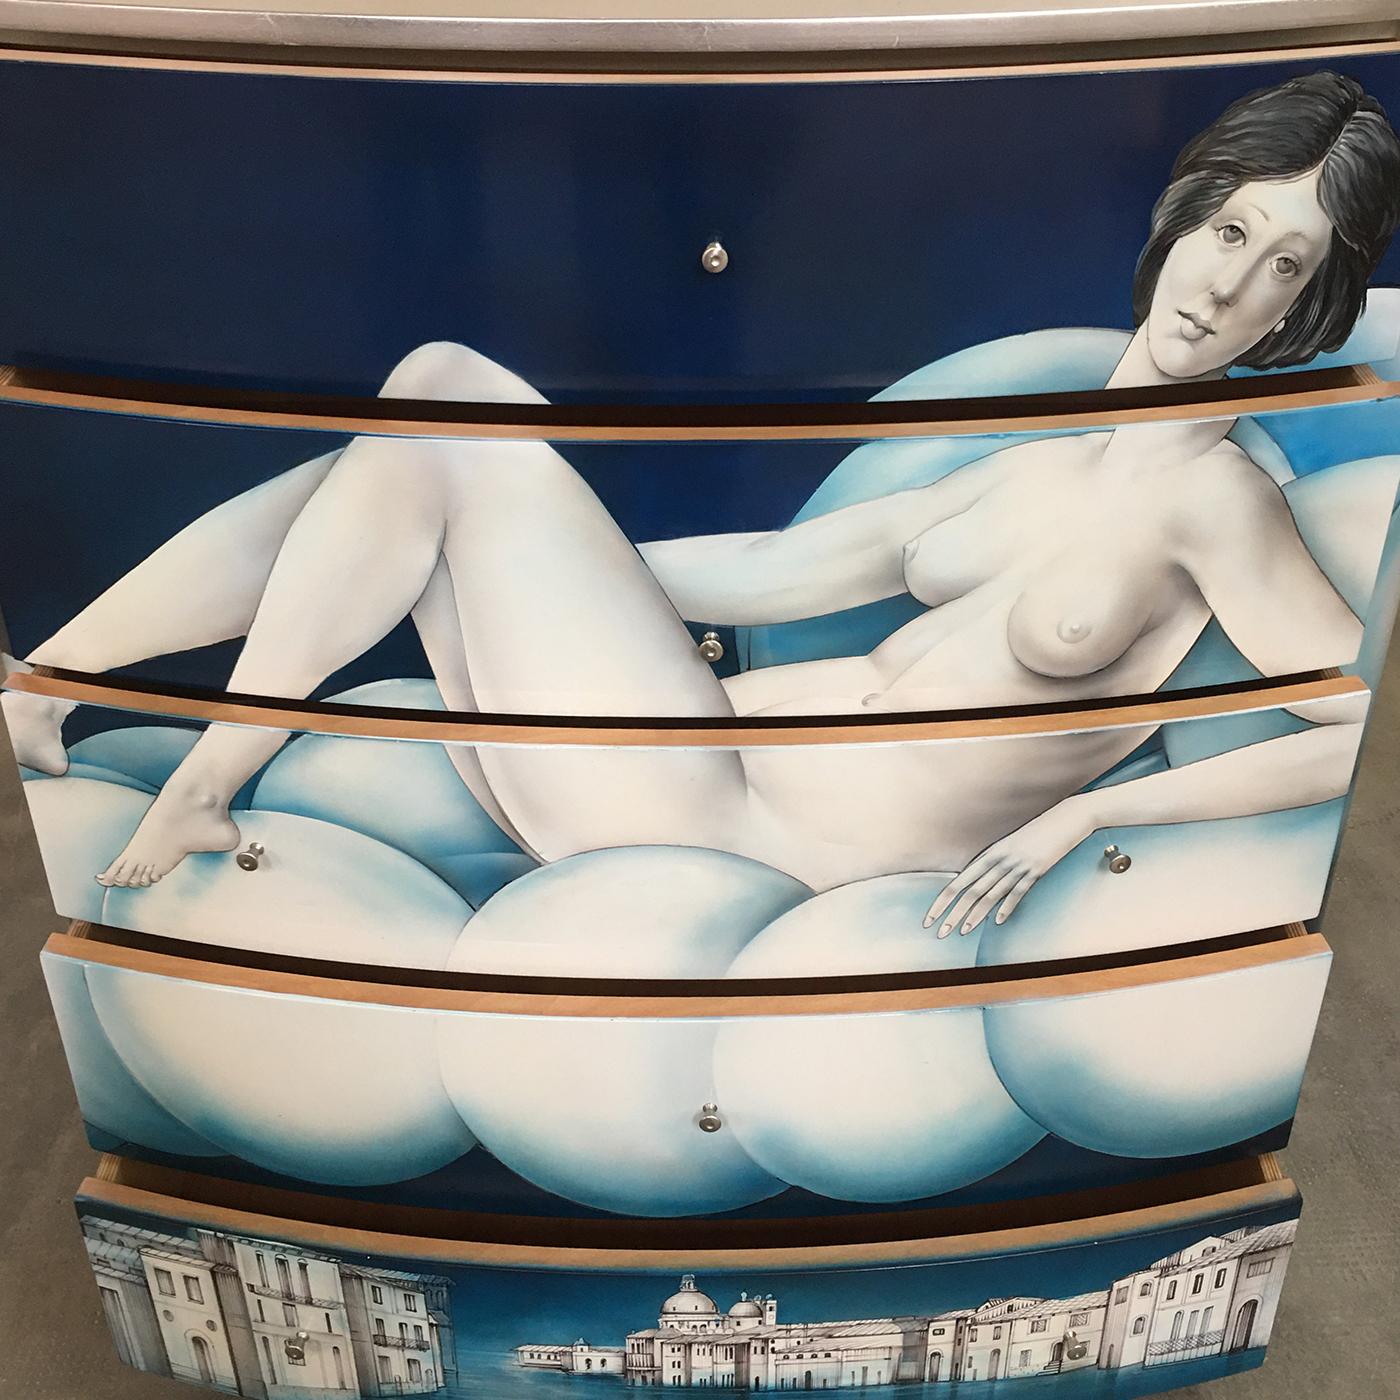 One of a kind, Il Sogno a Venezia (the Venetian Dream) chest of drawers features a hand painted design by Lamegli. The woman resting on clouds over the city of Venice is inspired by both Modigliani and Giò Ponti, resulting in a truly unique style